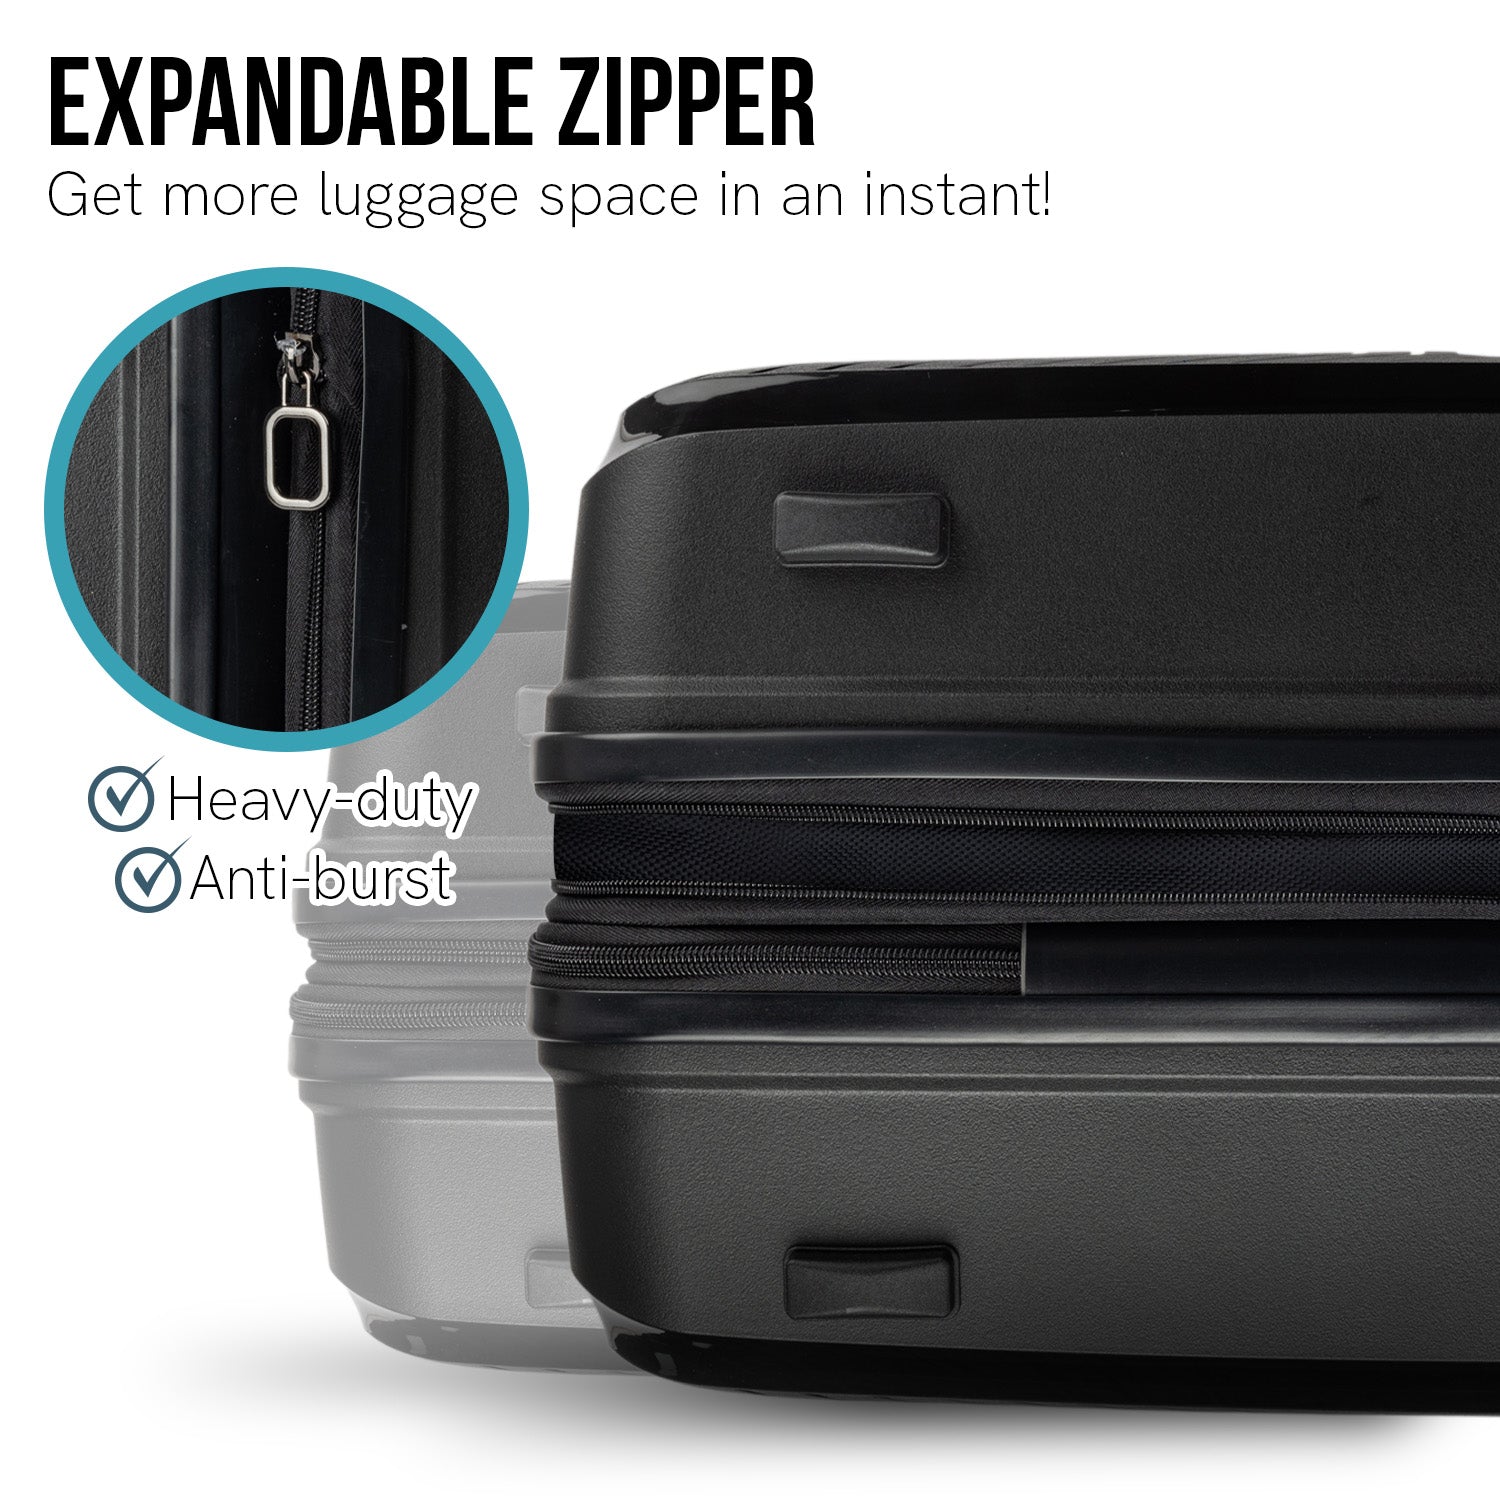 Olympus Astra 24in Lightweight Hard Shell Suitcase - Obsidian Black-Home &amp; Garden-PEROZ Accessories